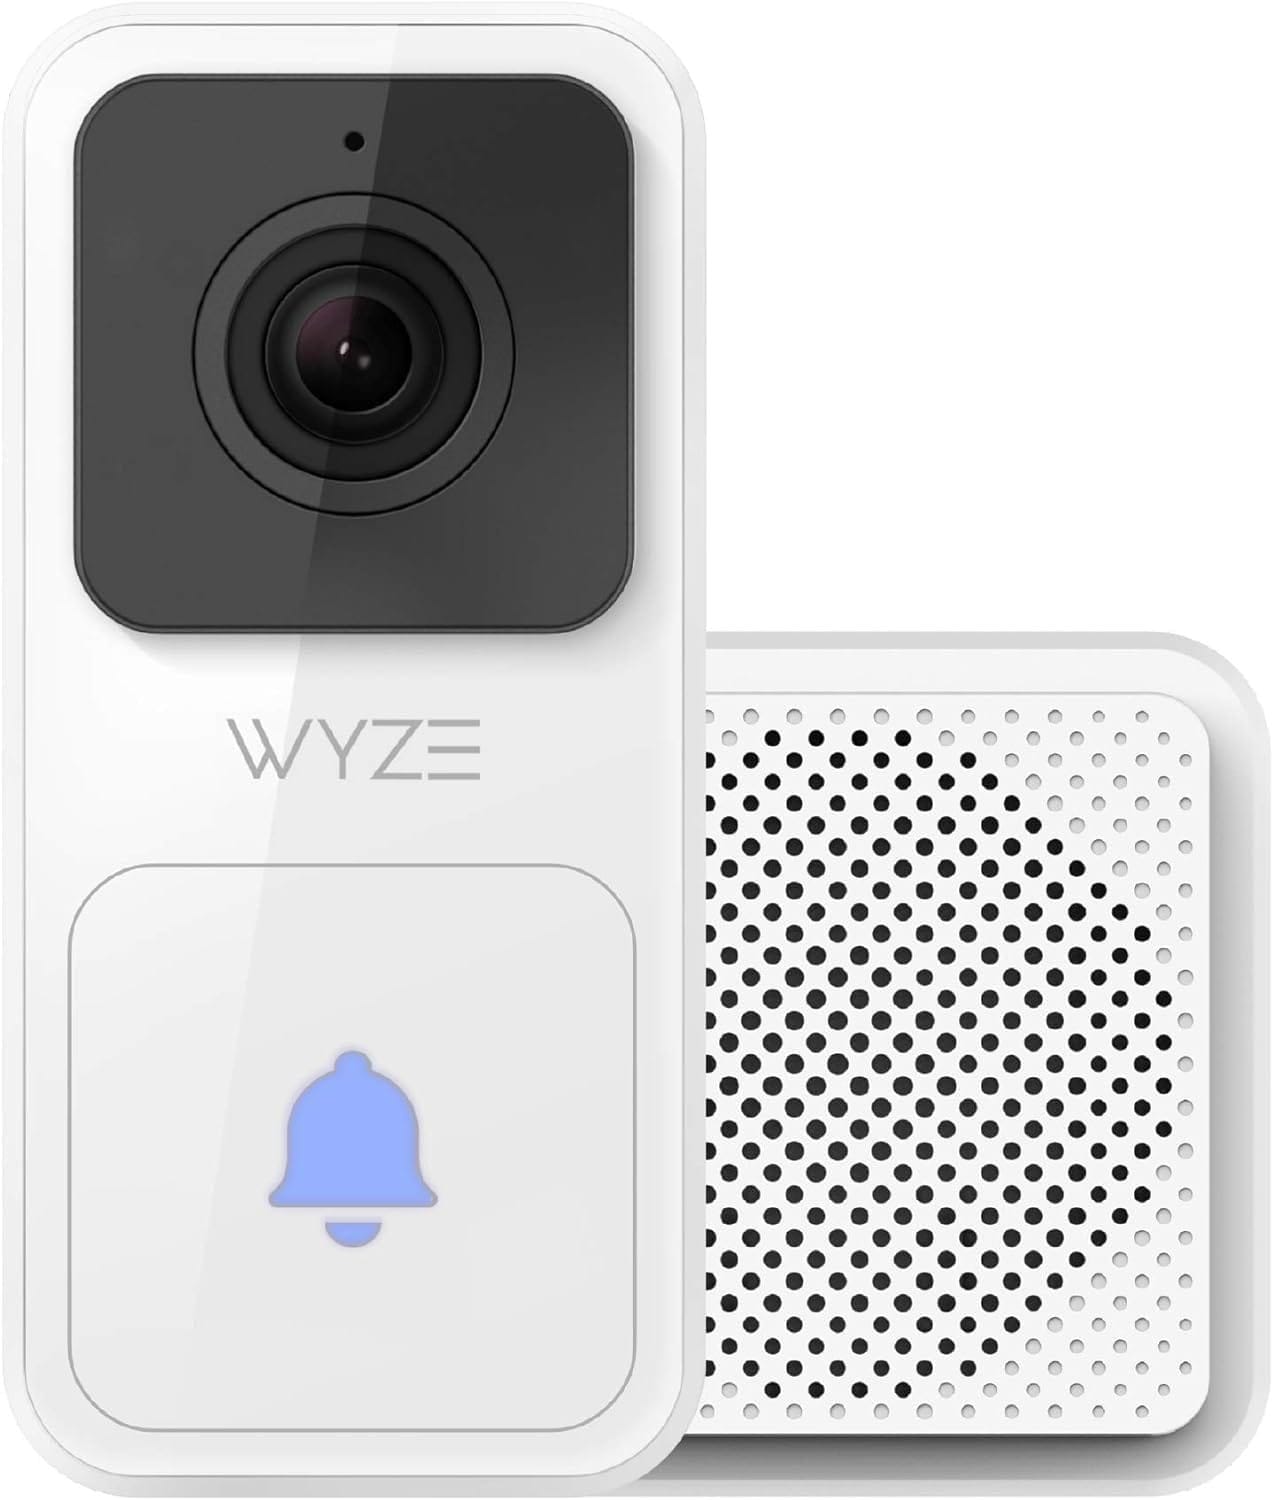 WYZE Video Doorbell with Chime (Horizontal Wedge Included), 1080p HD Video, 3:4 Aspect Ratio: 3:4 Head-to-Toe View, 2-Way Audio, Night Vision, Hardwired, Works with Alexa  Google Assistant